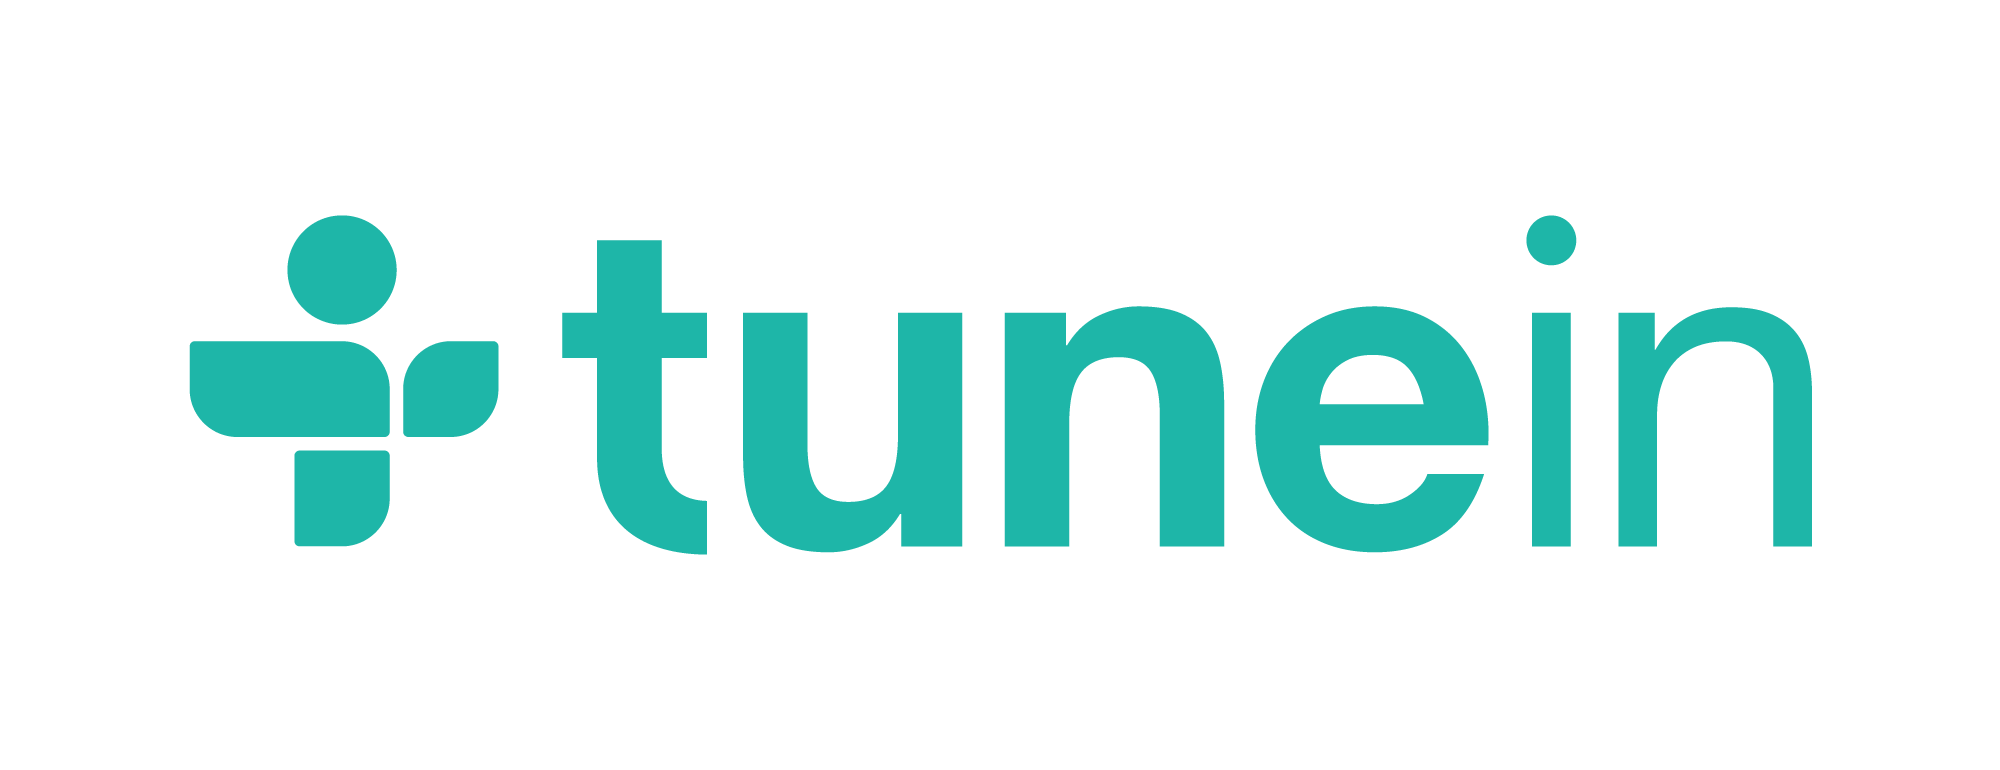 tunein.png